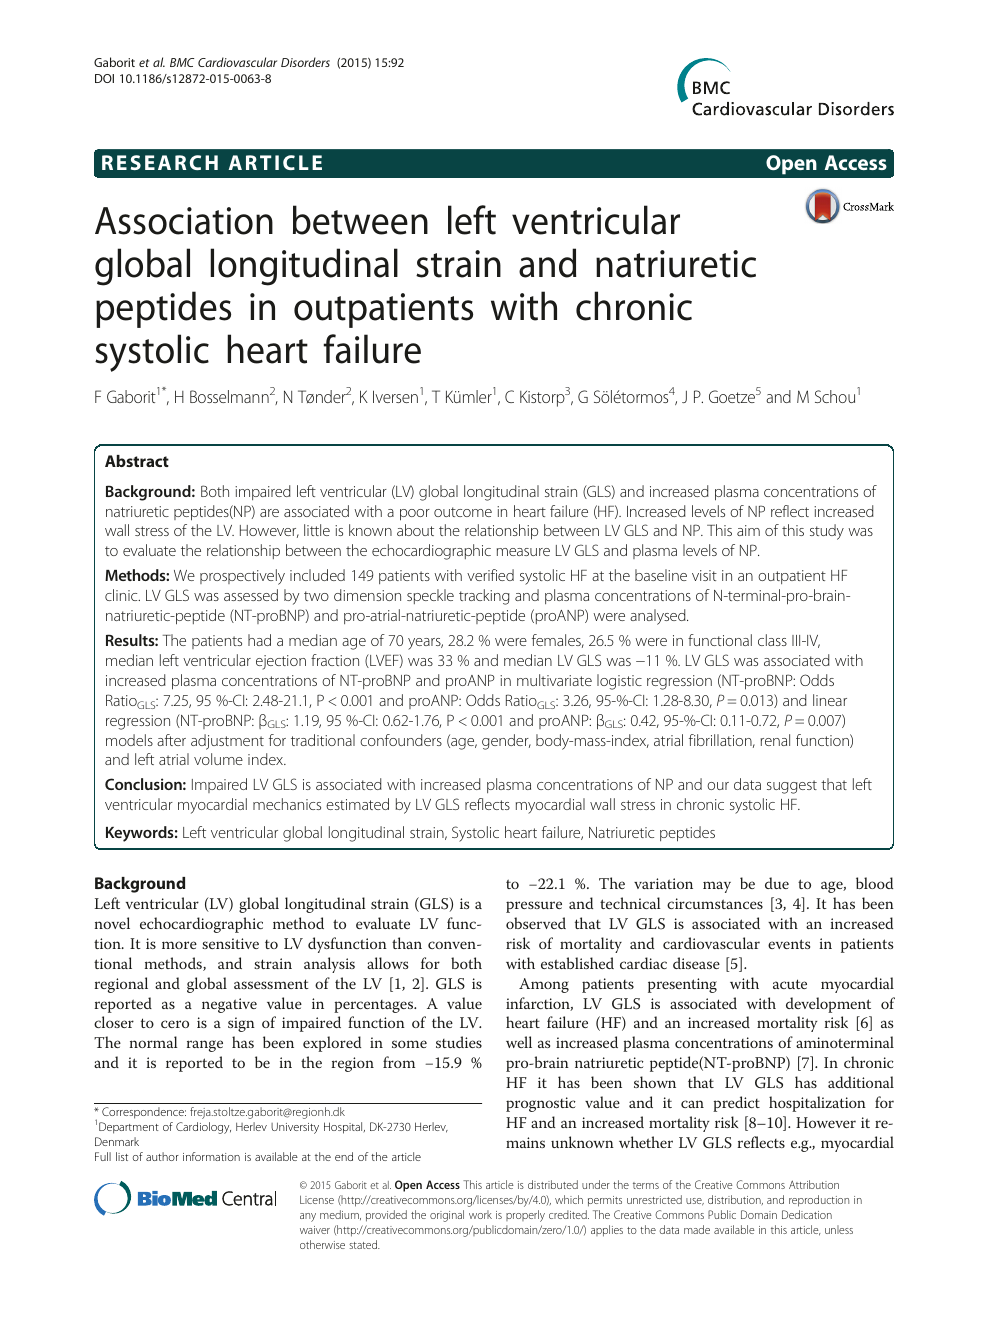 Impaired left ventricular global longitudinal strain is associated with  elevated left ventricular filling pressure after myocardial infarction